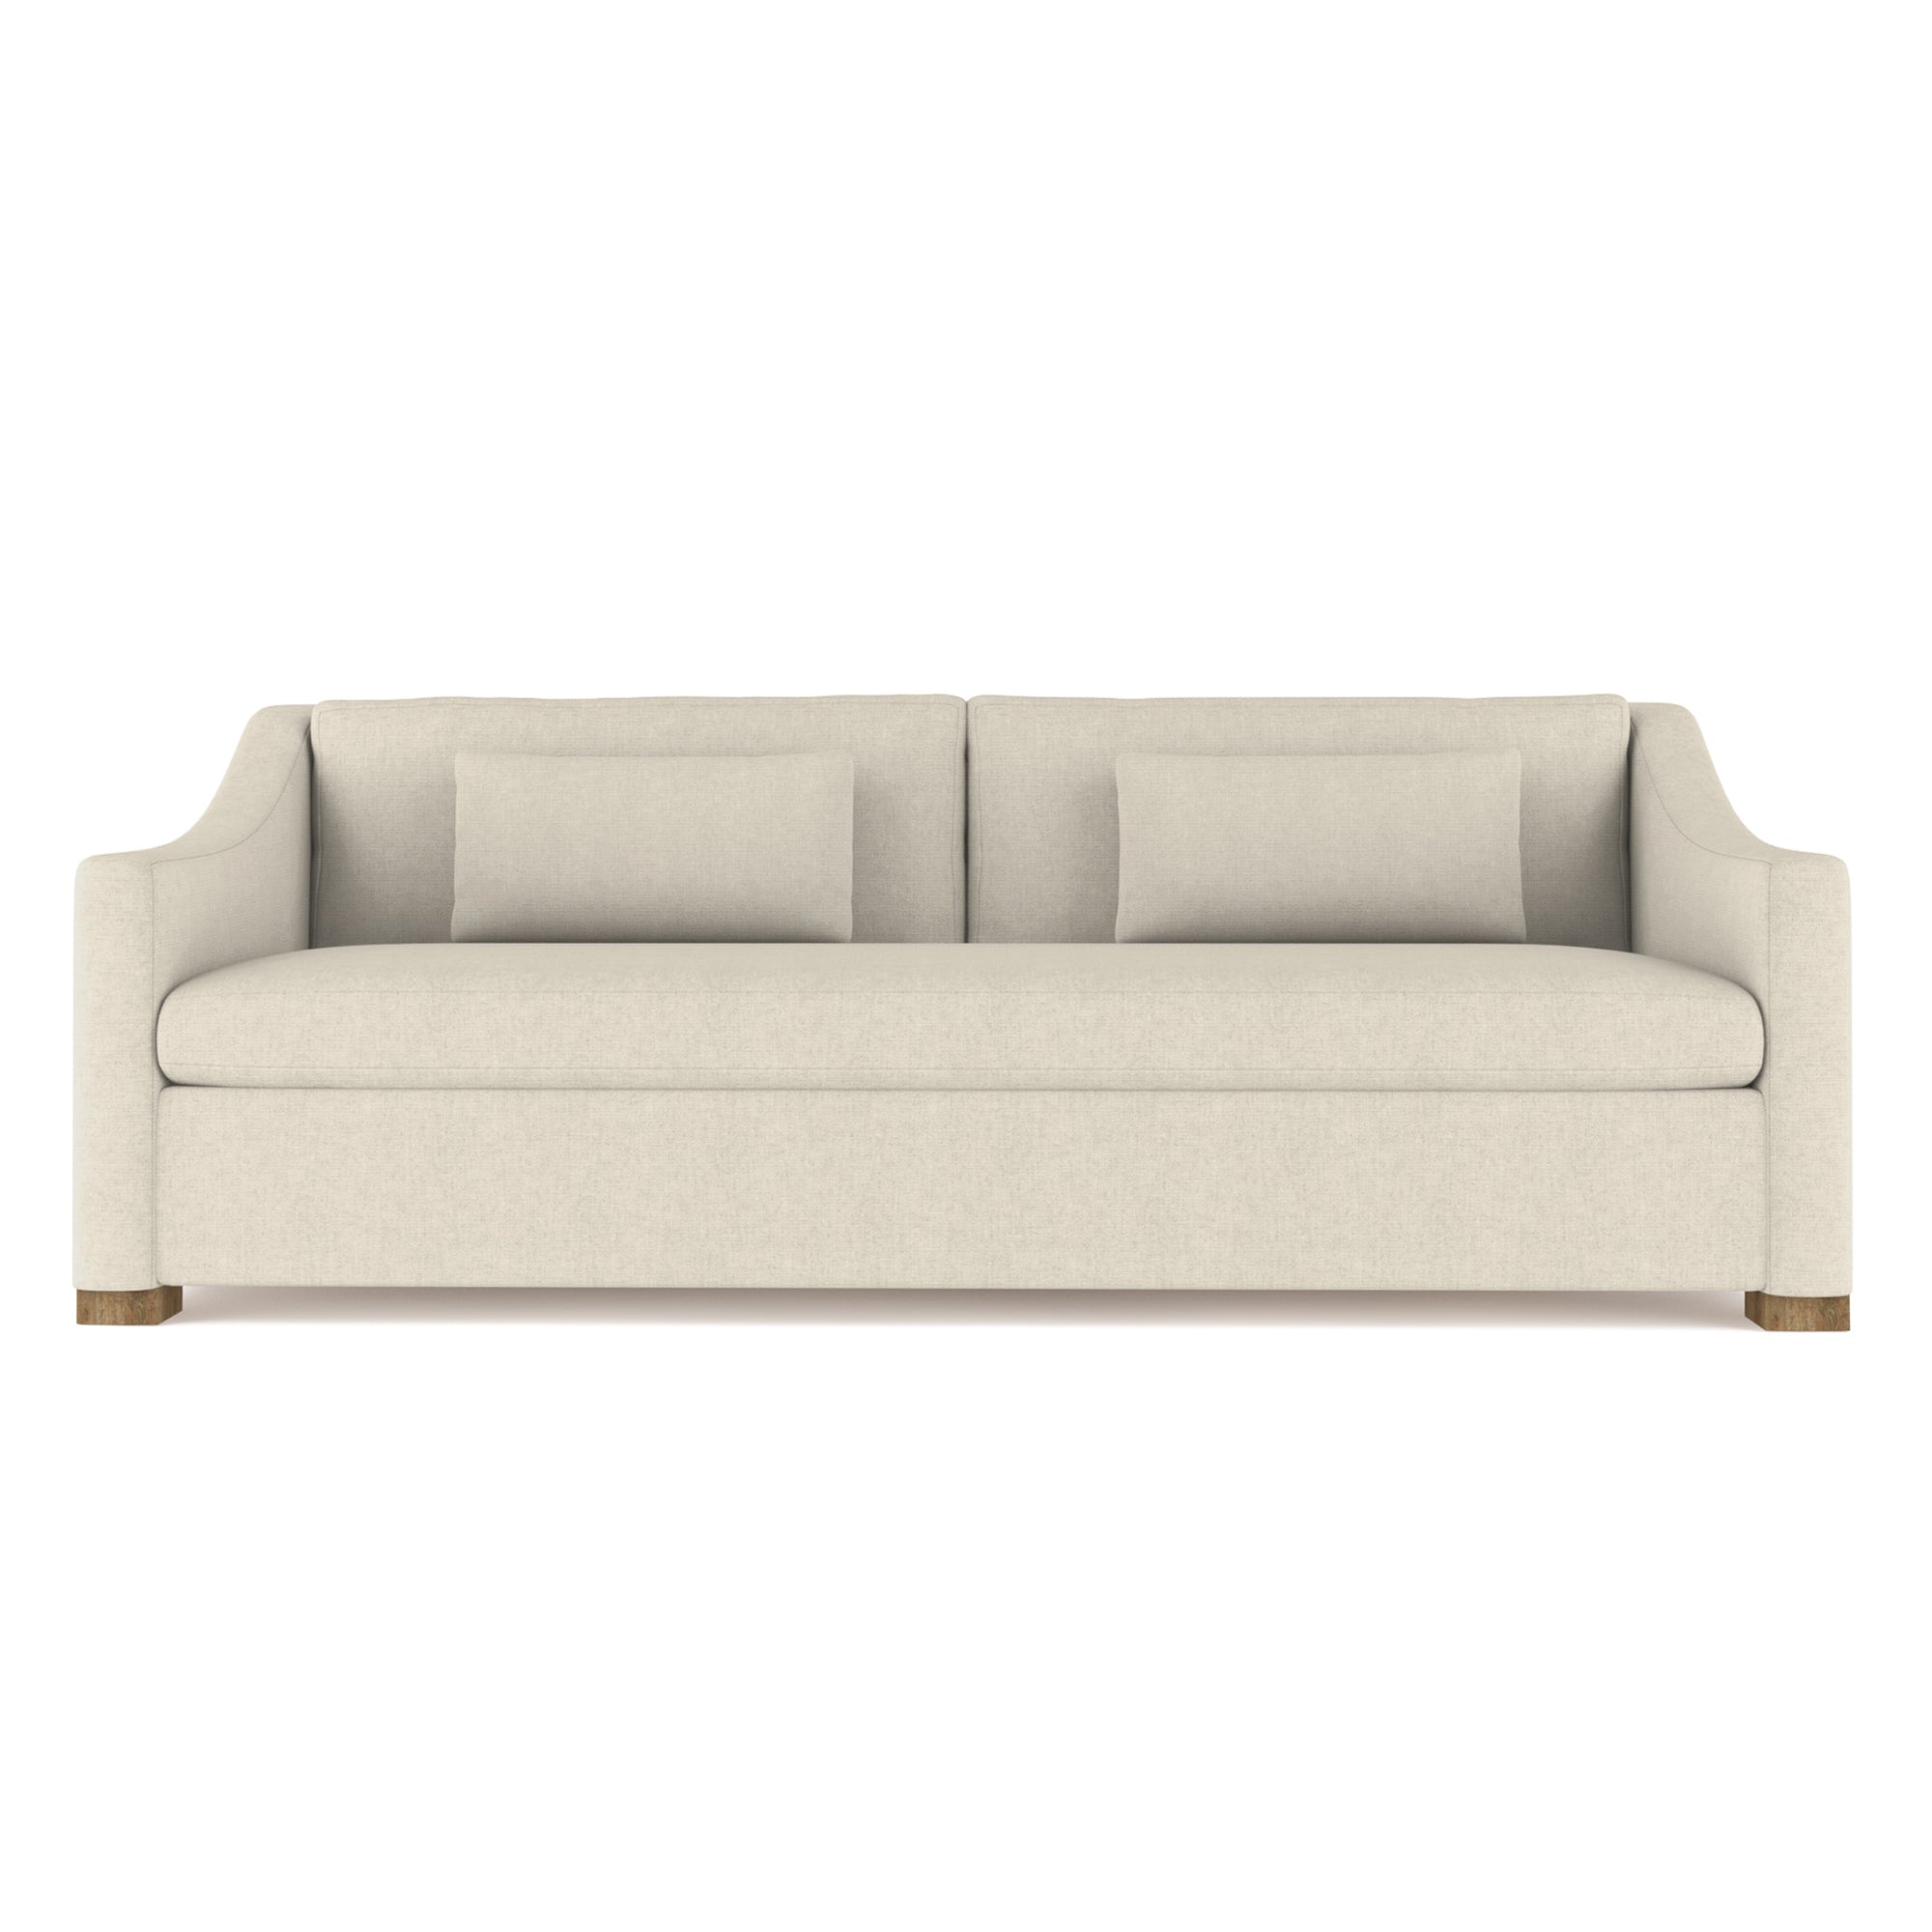 Crosby Sofa - Oyster Box Weave Linen